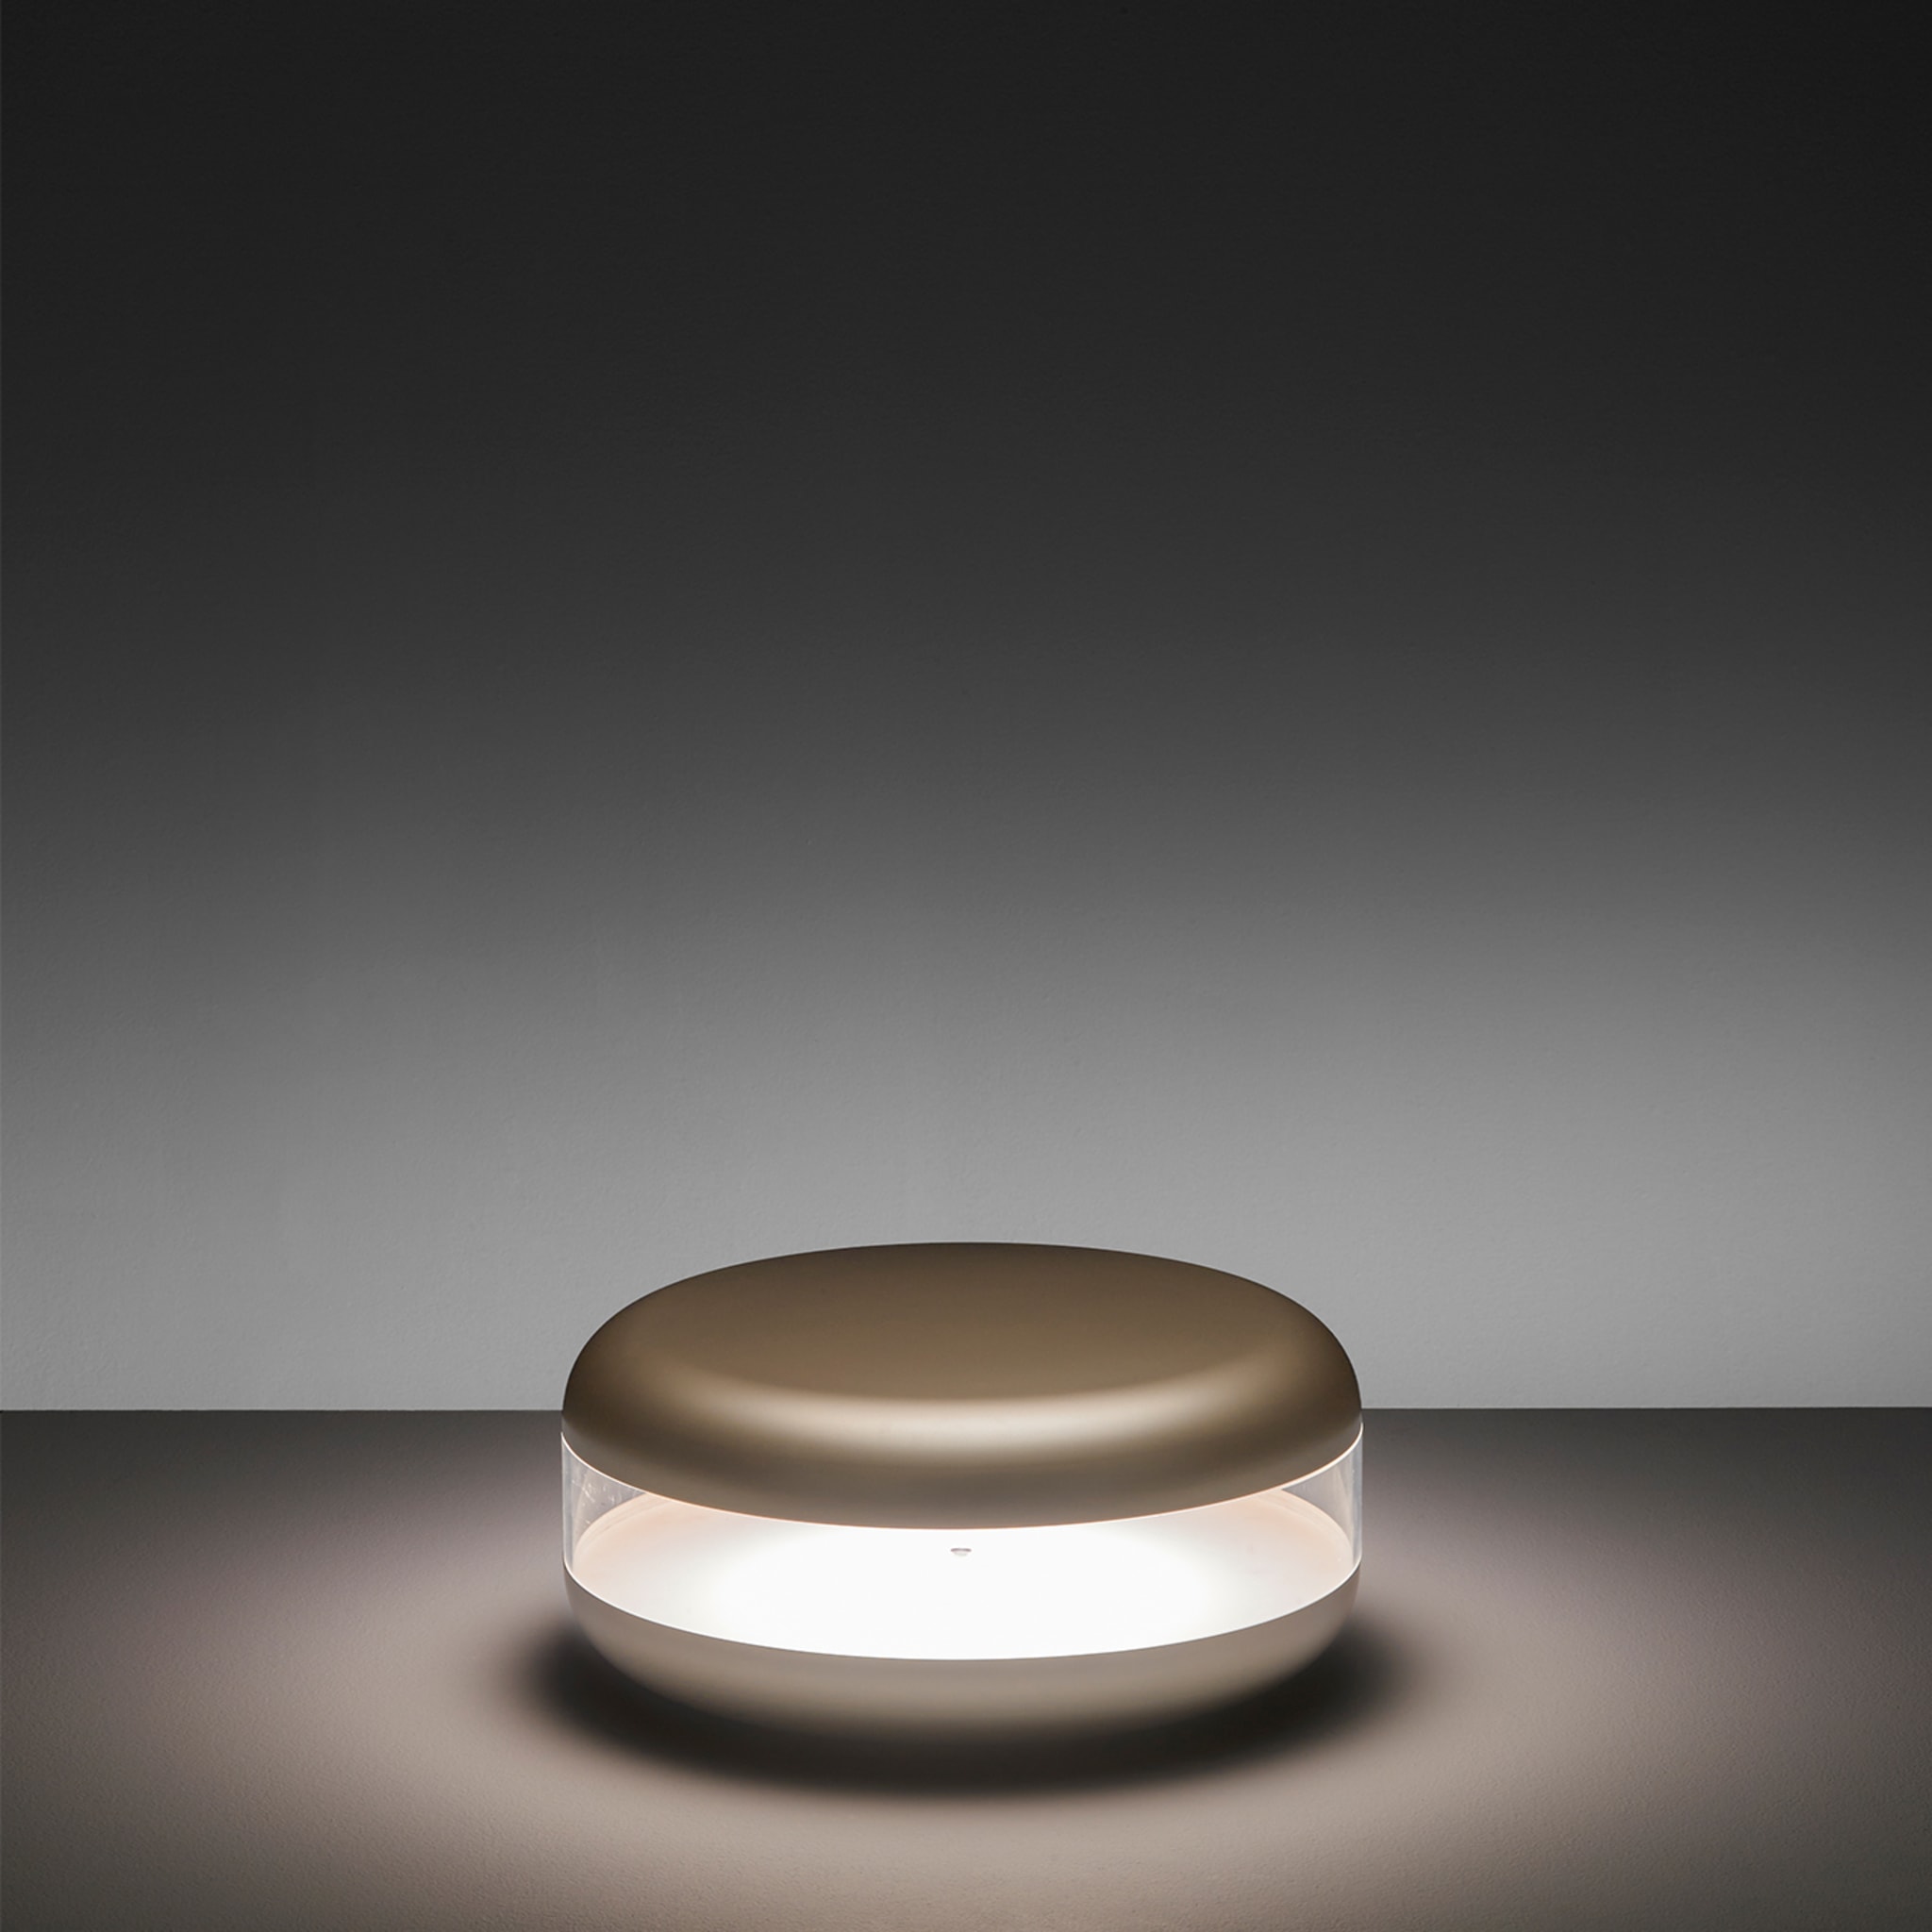 Macaron Brown Table Lamp by Parisotto + Formenton - Alternative view 1